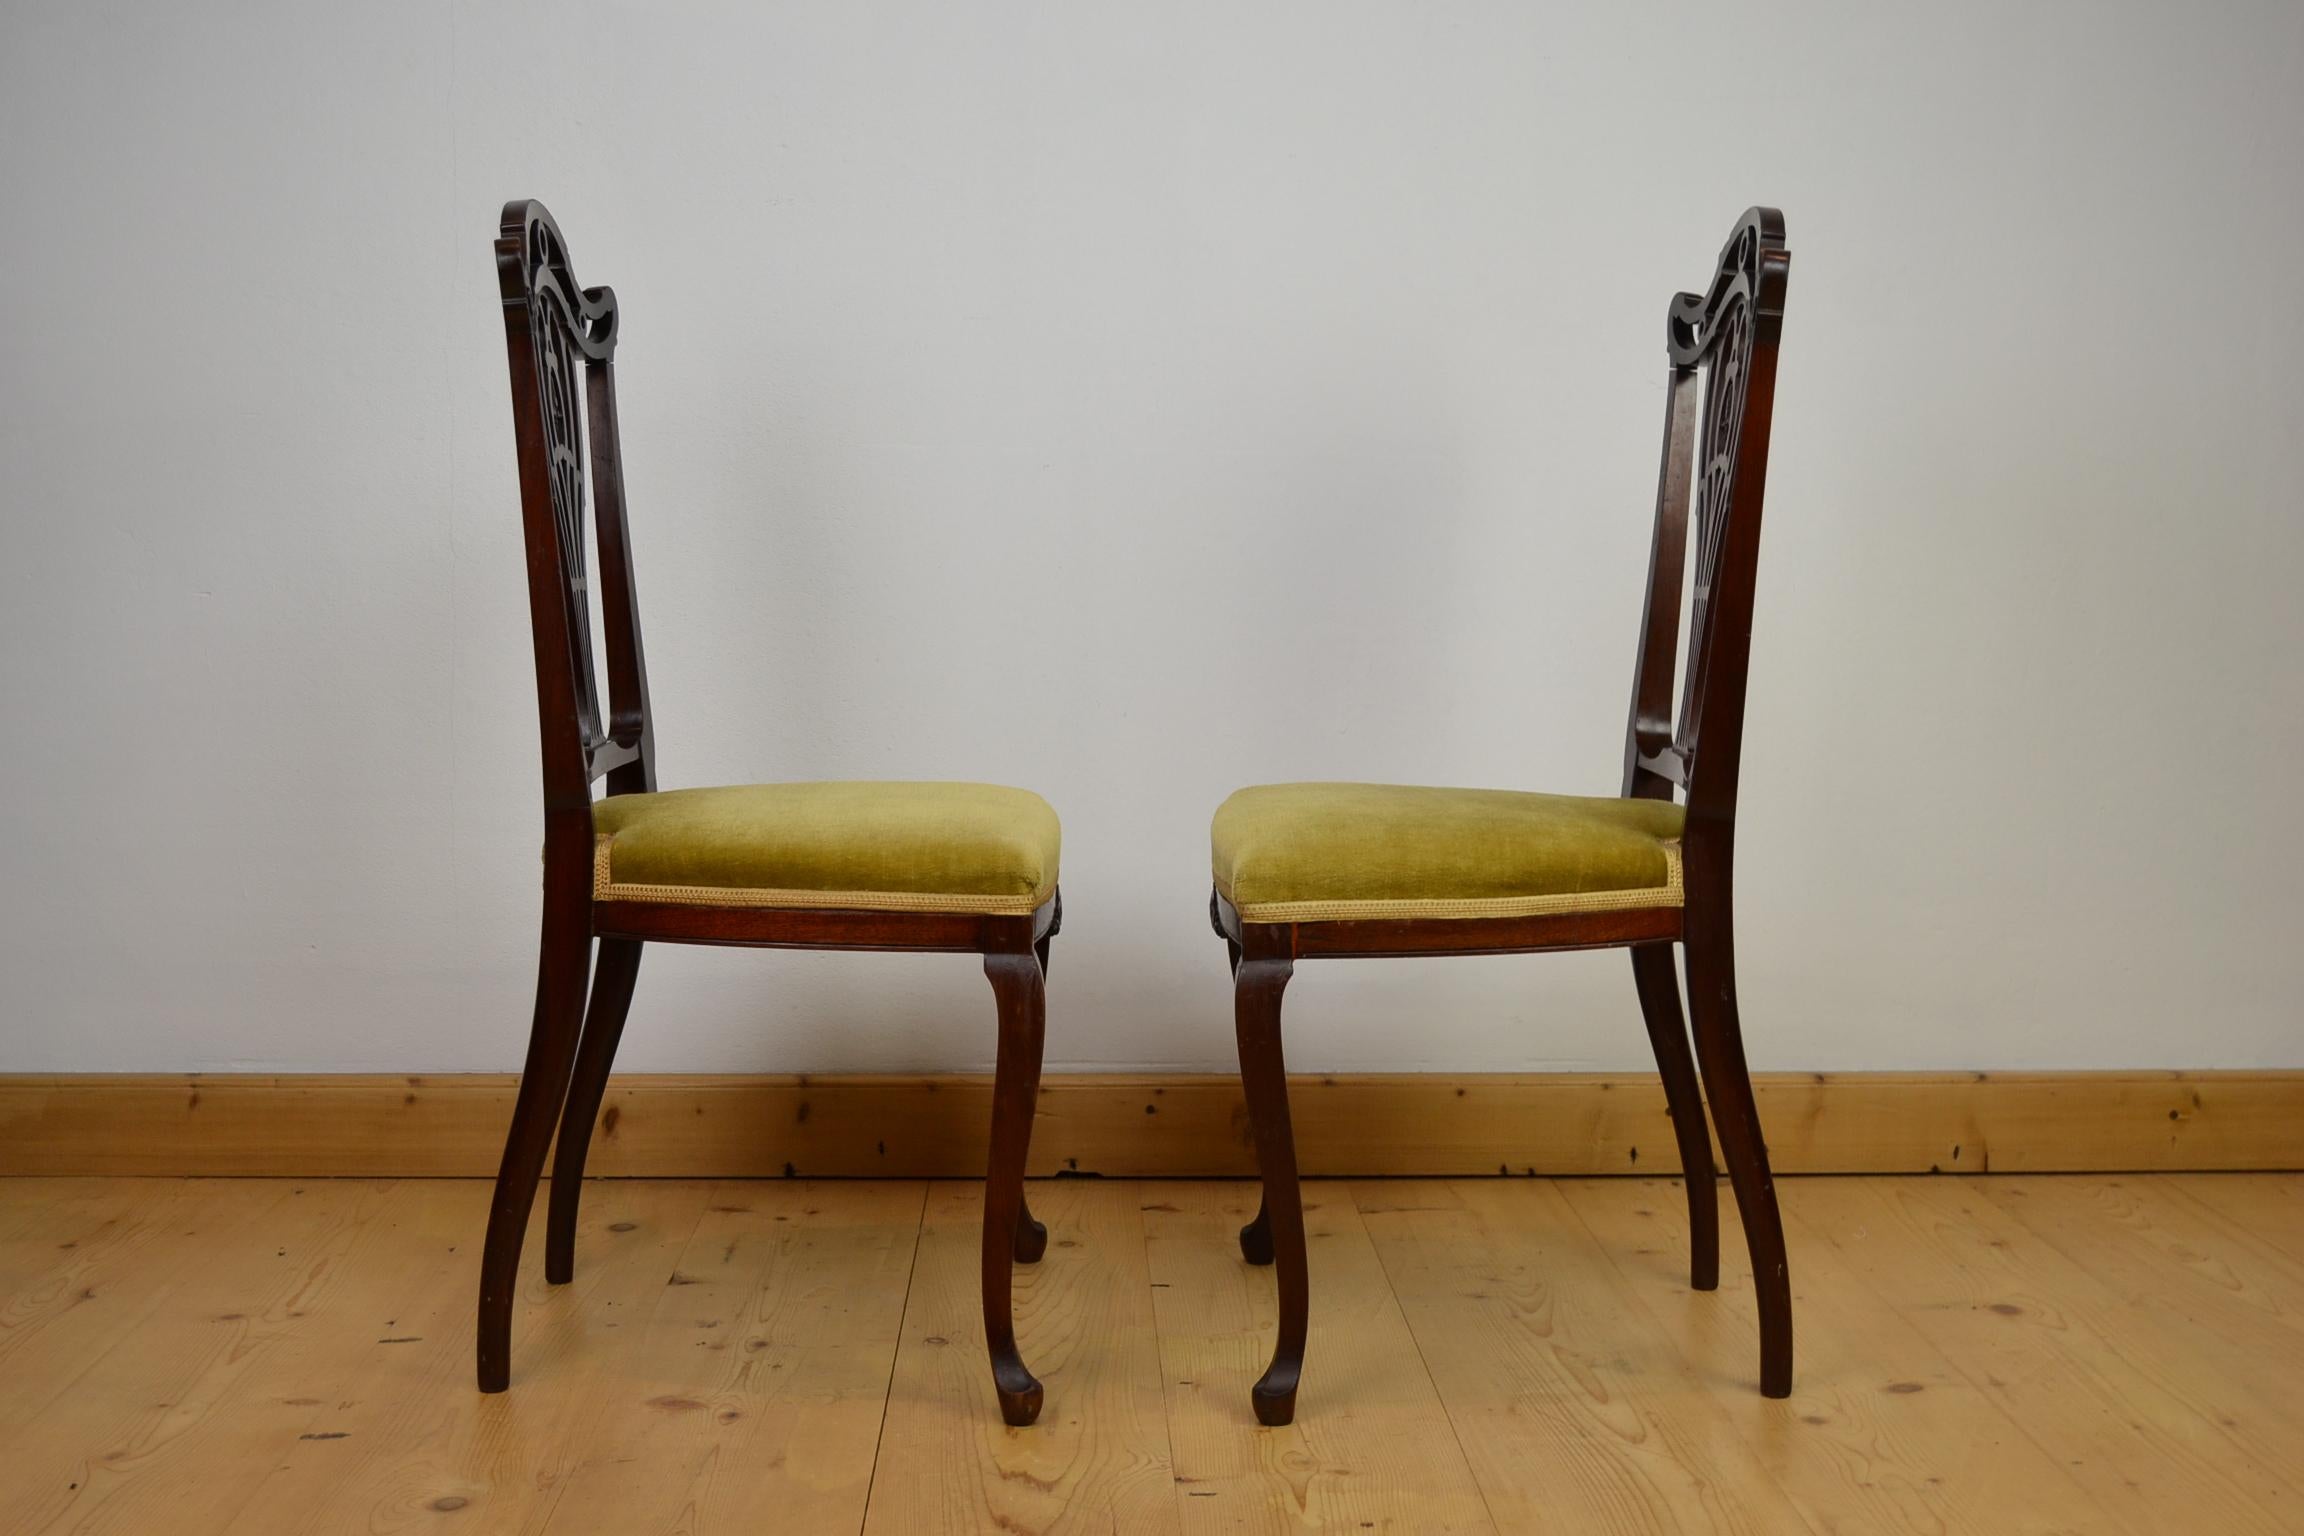 Hollandia Pander & Zn Pair of Side Chairs, Late 19th Century For Sale 10